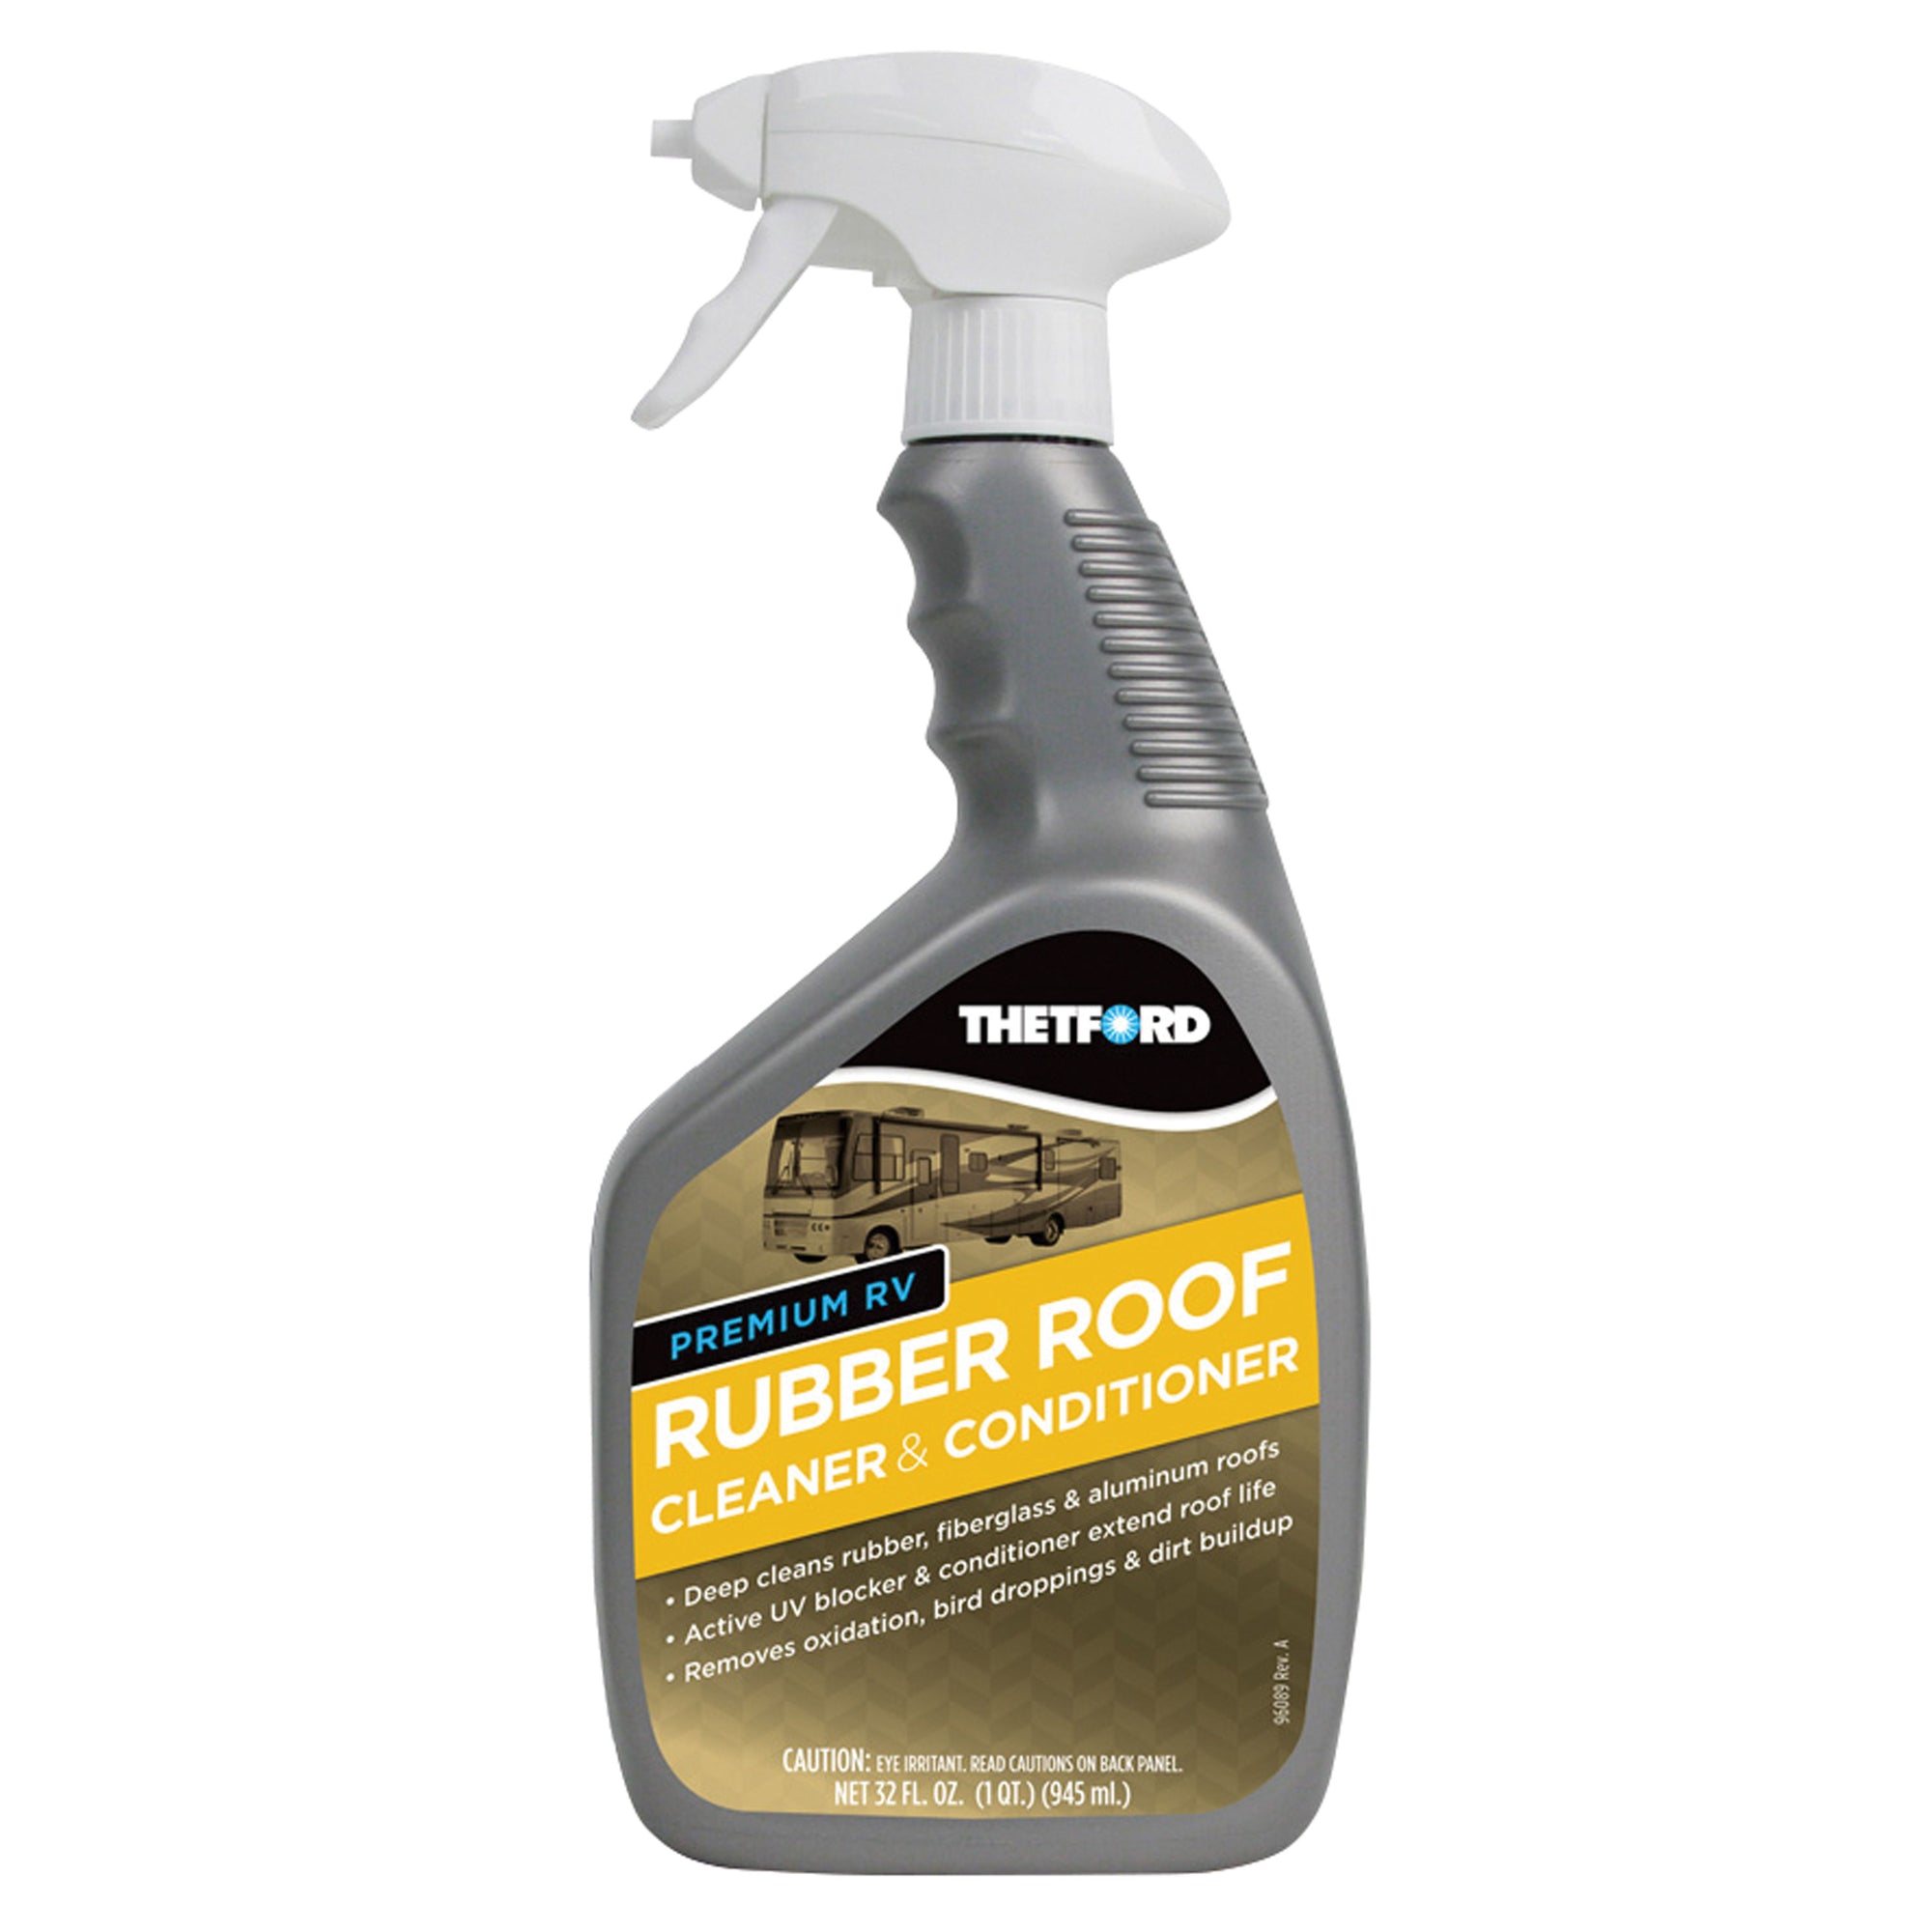 Thetford 32512 Premium RV Rubber Roof Cleaner and Conditioner - 32 oz.